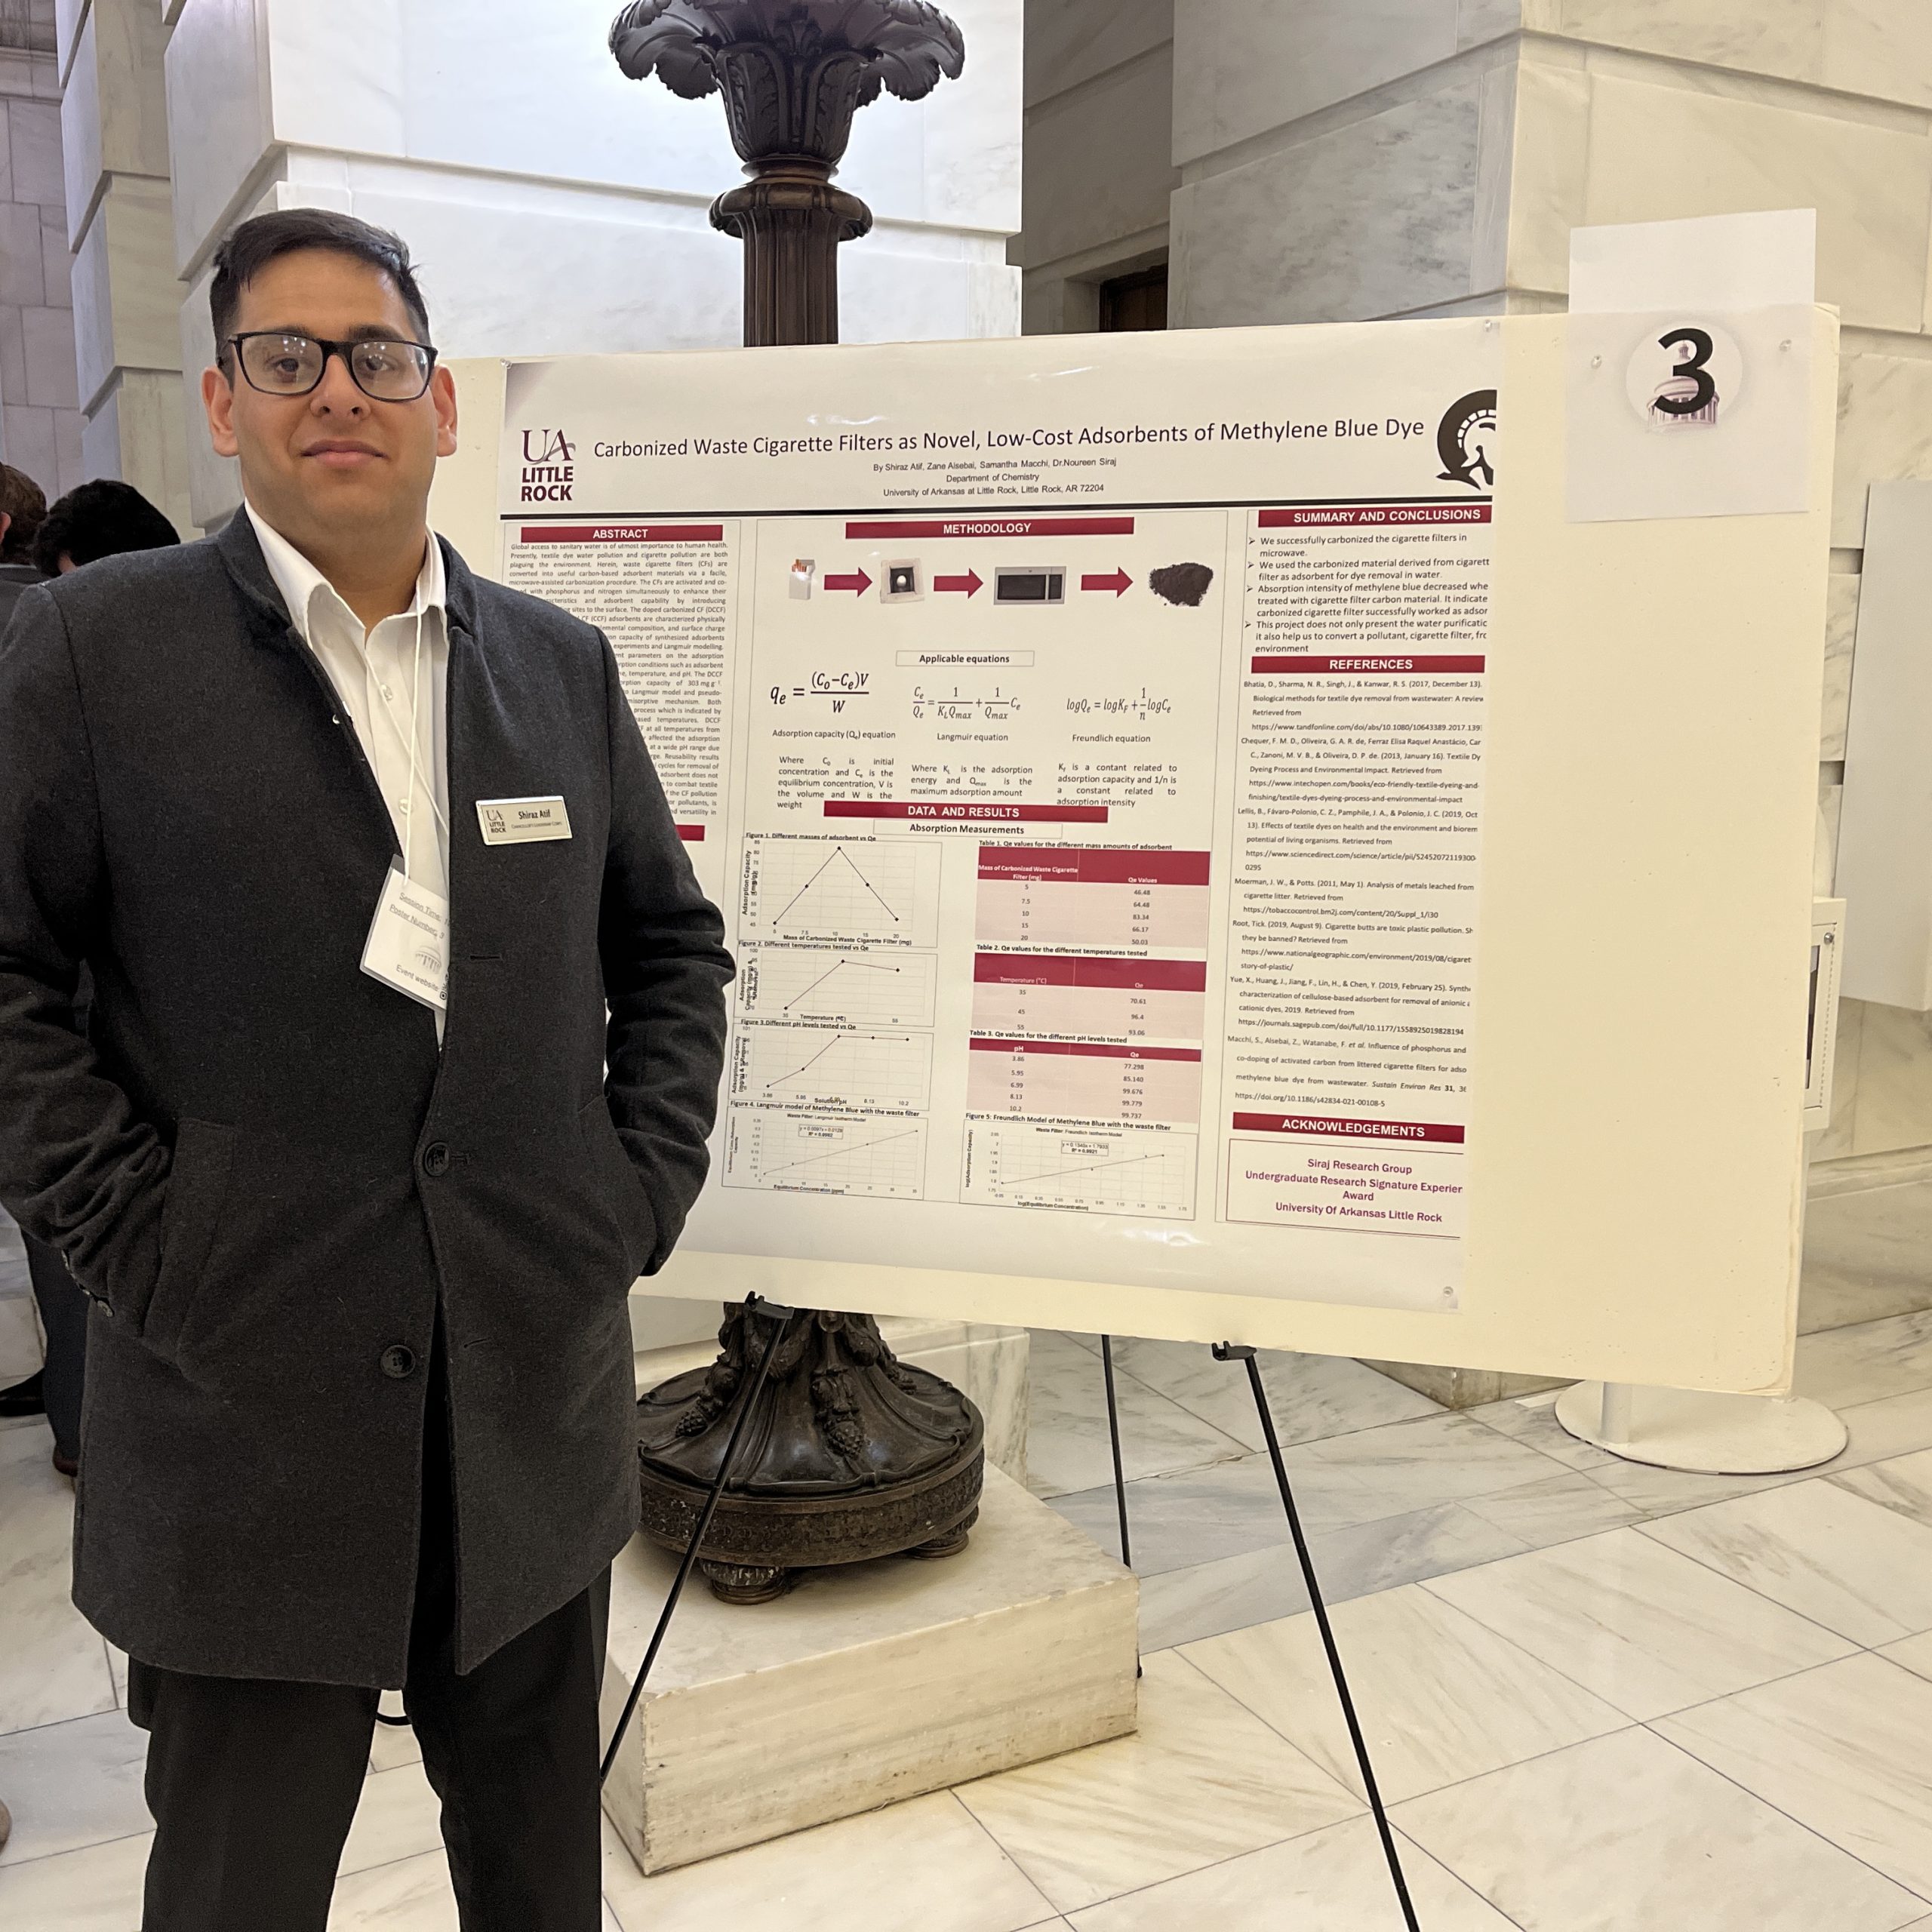 Shiraz Atif poses with his project on Carbonized Waste Cigarette Filters as Novel, Low-Cost Adsorbents of Methylene Blue Dye at the Arkansas State Capitol.